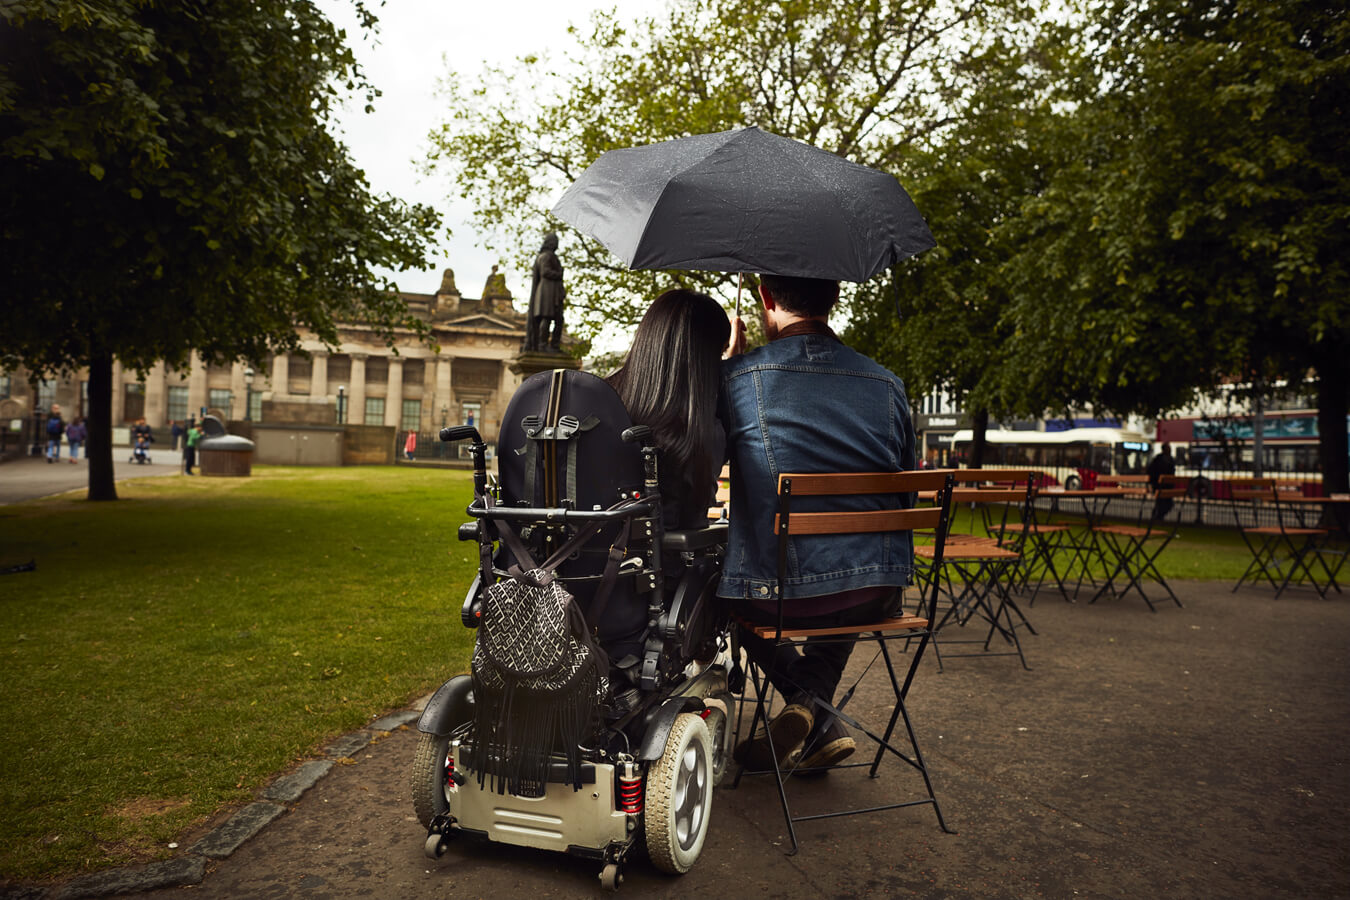 Emma and Allan sitting at a kiosk in Princes Garden, Edinburgh. They are sitting at a table with their backs to the camera. Allan is holding an umbrella over them.